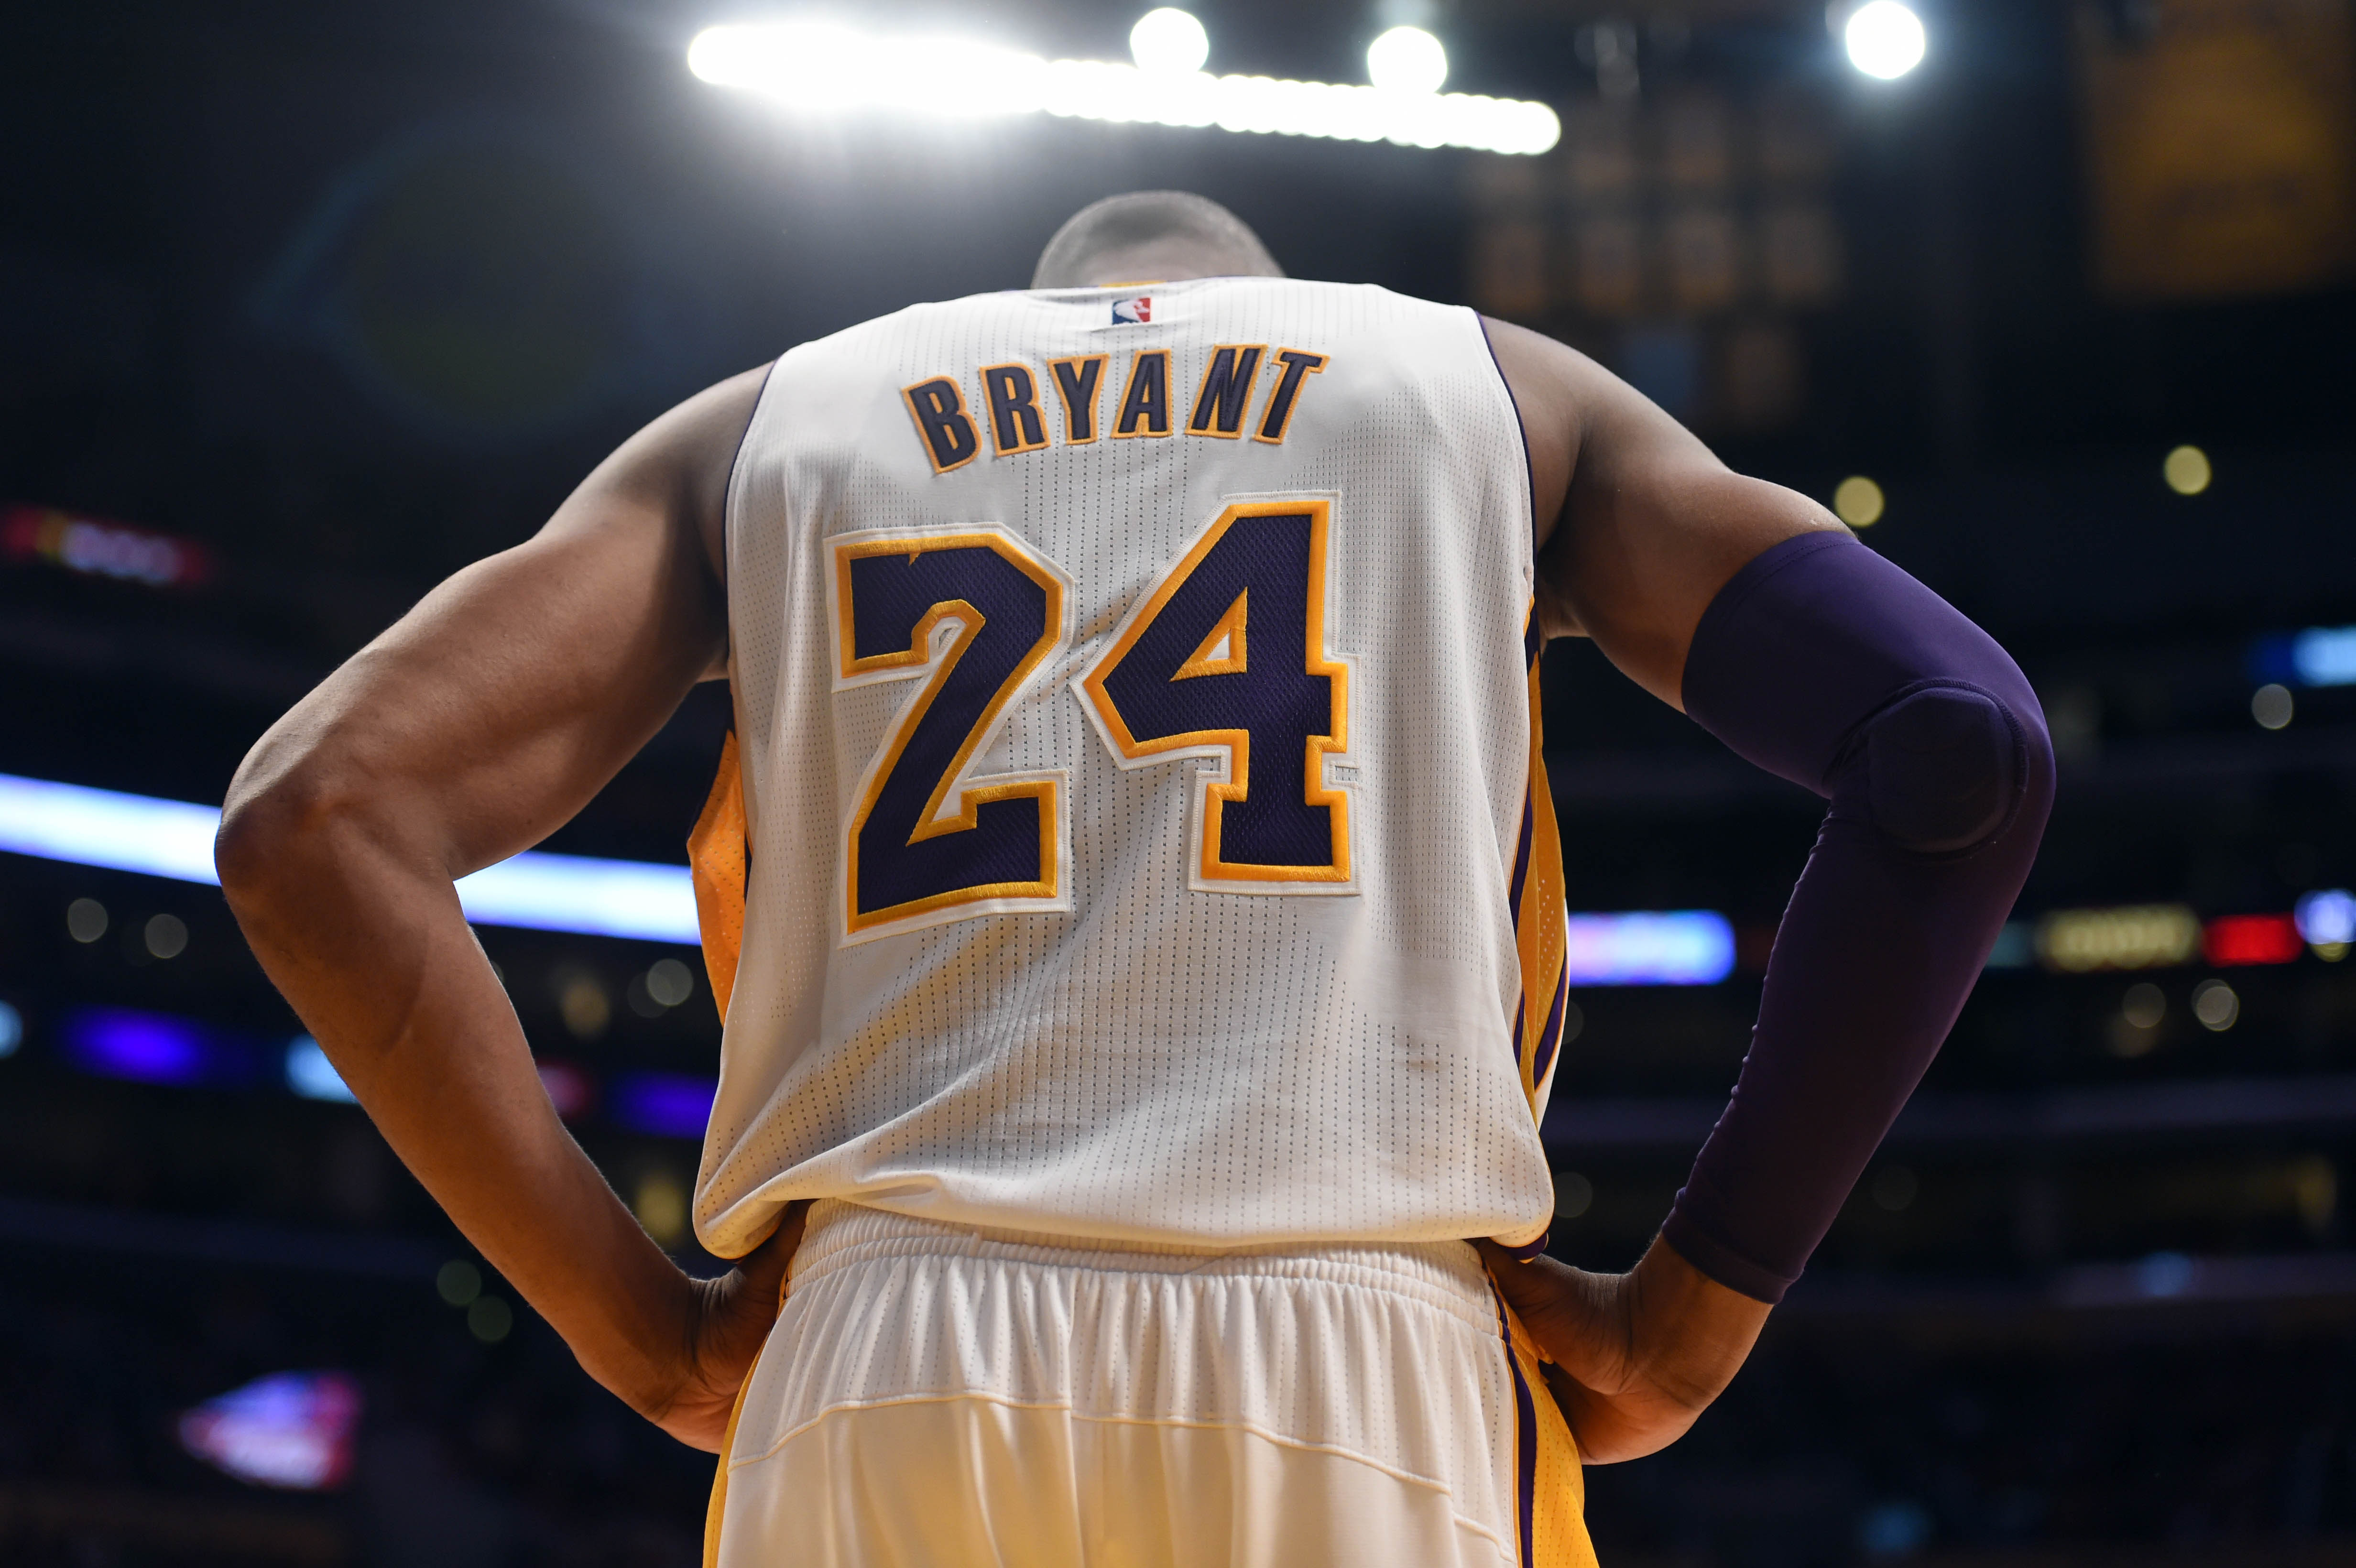 Kobe Bryant retired after the 2015-16 NBA season, capping a prolific 20-year NBA career. (Photo by Stephen Carr / Daily Breeze)